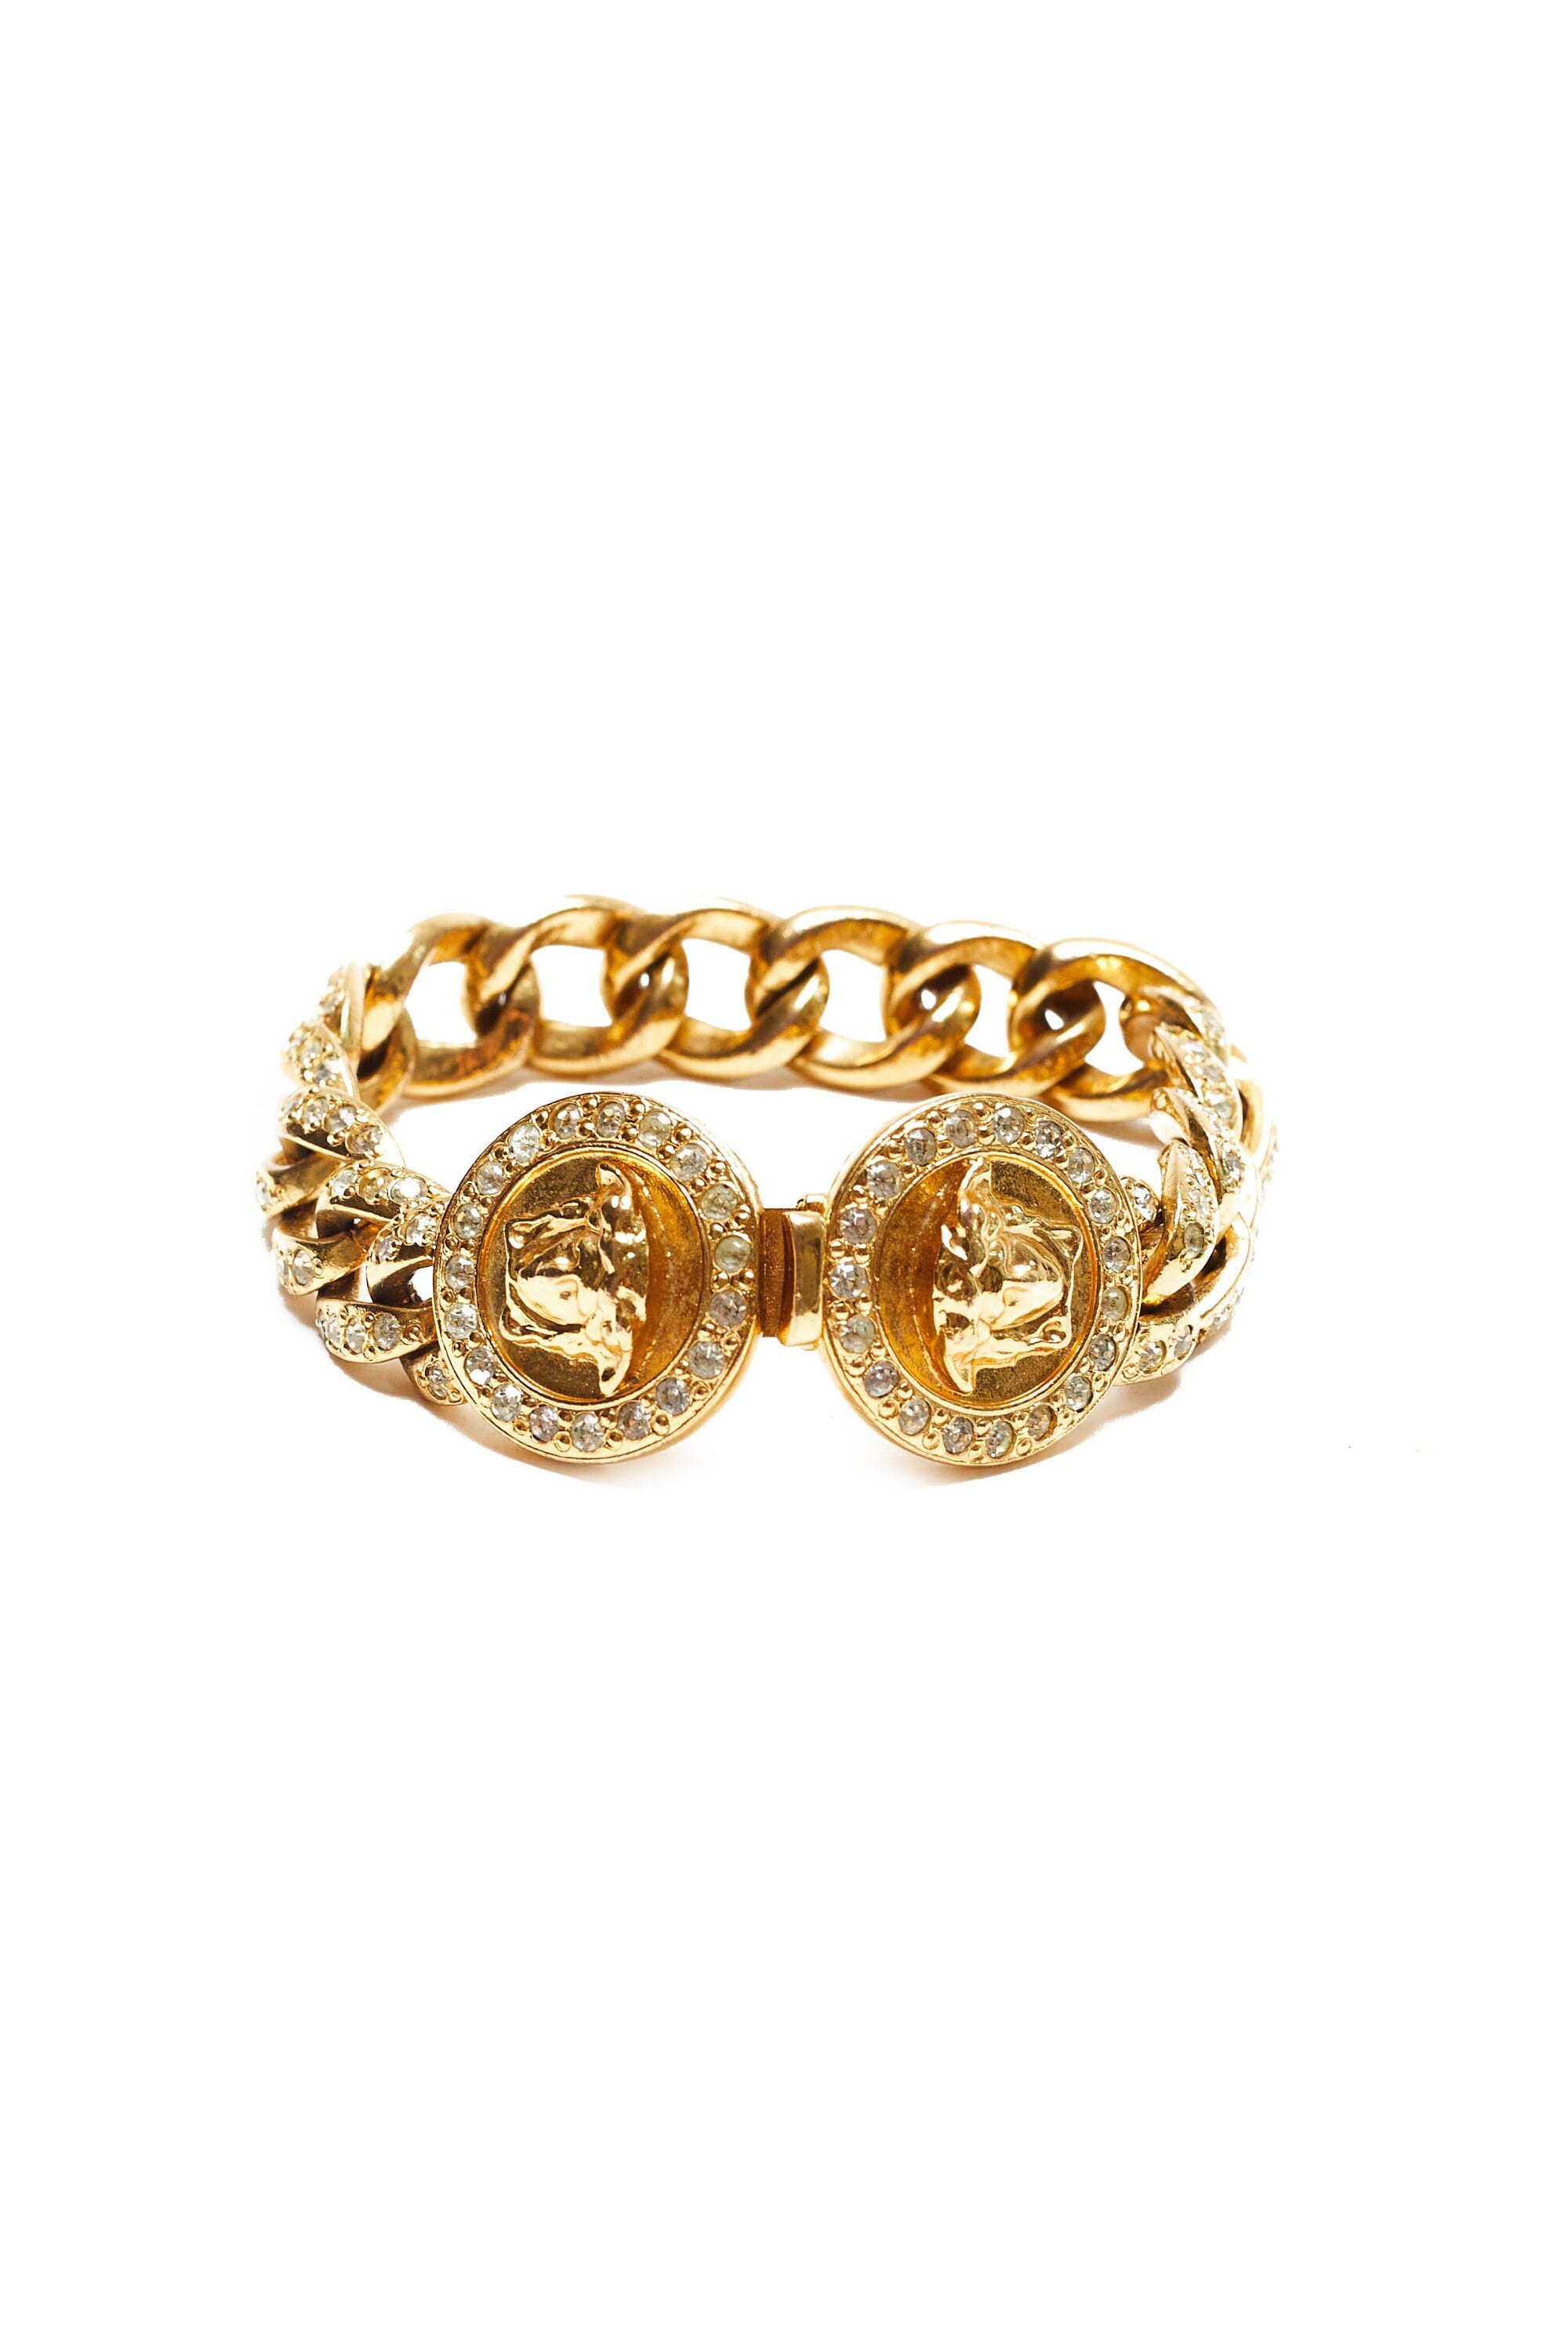 Versace Bracelet Real 18k Gold | D Fontaine Jewellers